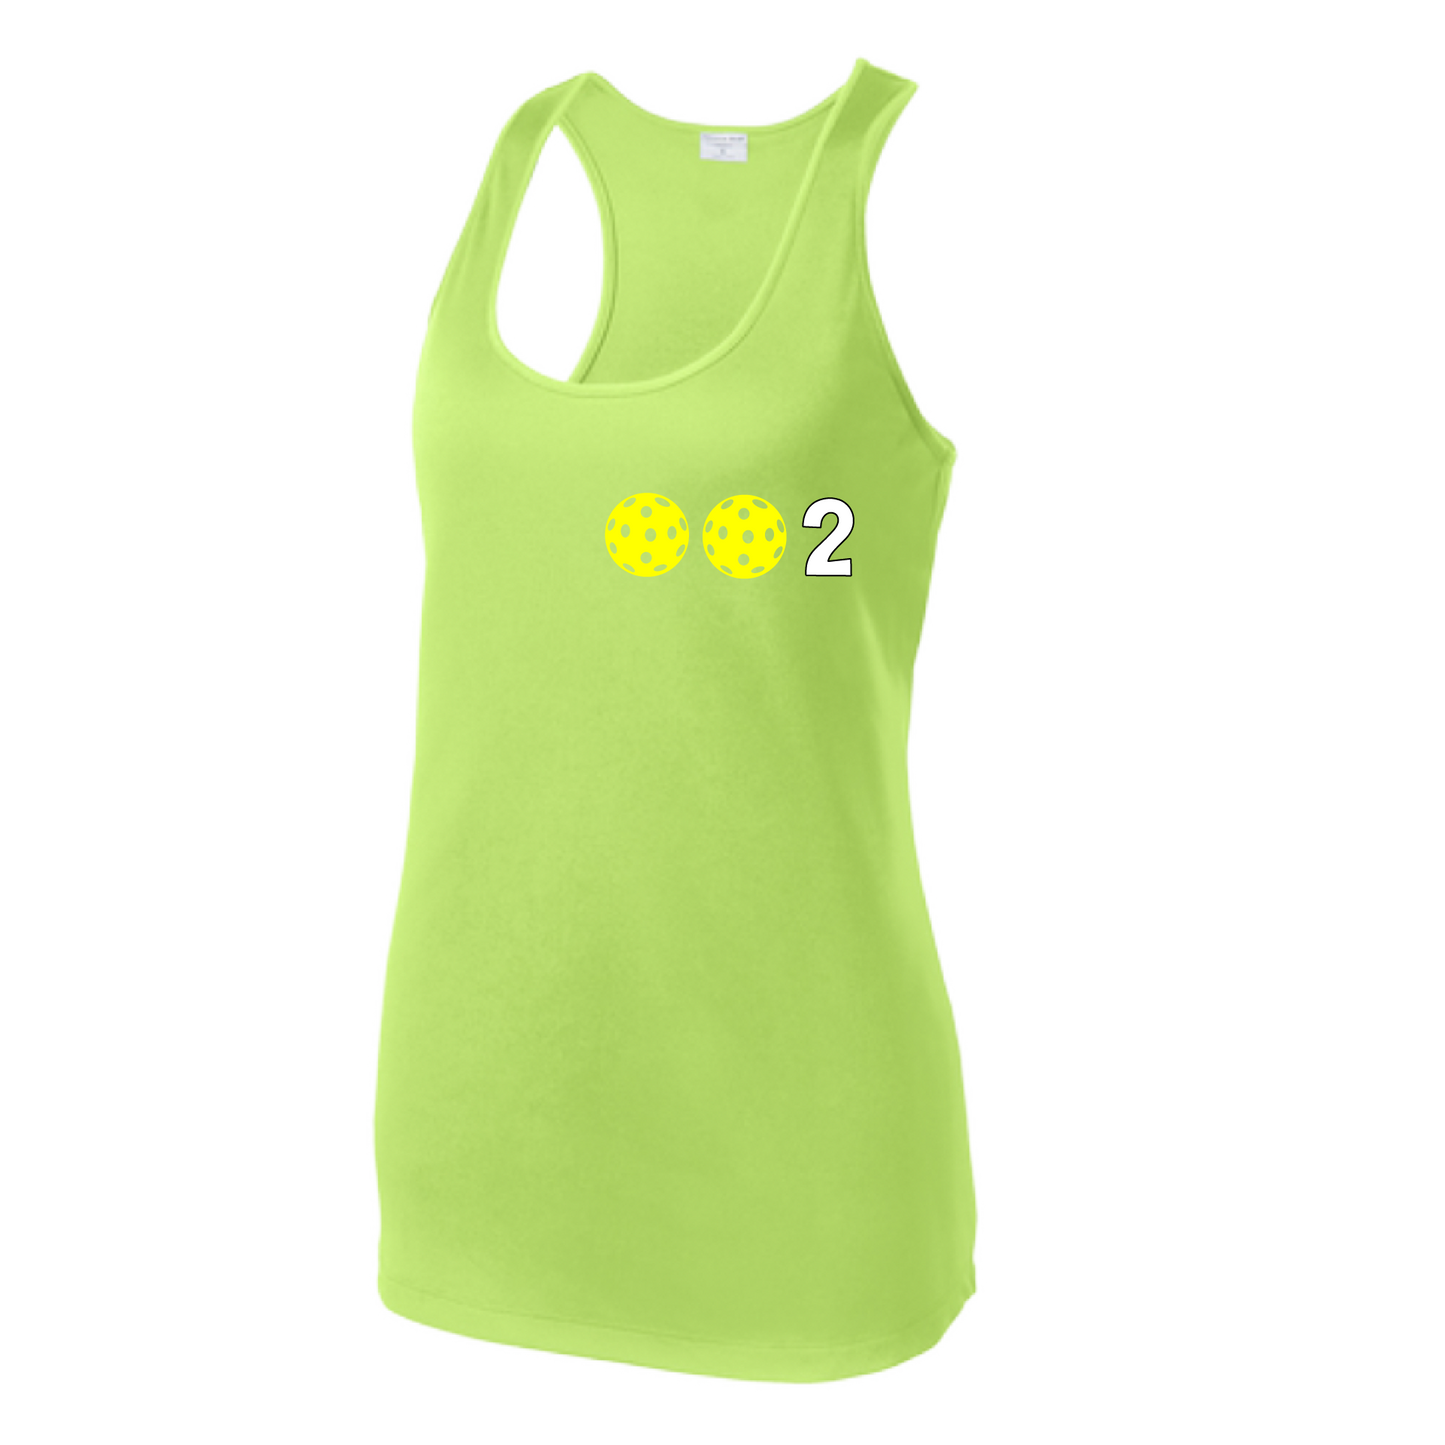 Design: 002 with Customizable Ball Colors (Yellow, Pink, White)  Women's Styles: Racerback Tank  Shirts are lightweight, roomy and highly breathable. These moisture-wicking shirts are designed for athletic performance. They feature PosiCharge technology to lock in color and prevent logos from fading. Removable tag and set-in sleeves for comfort.